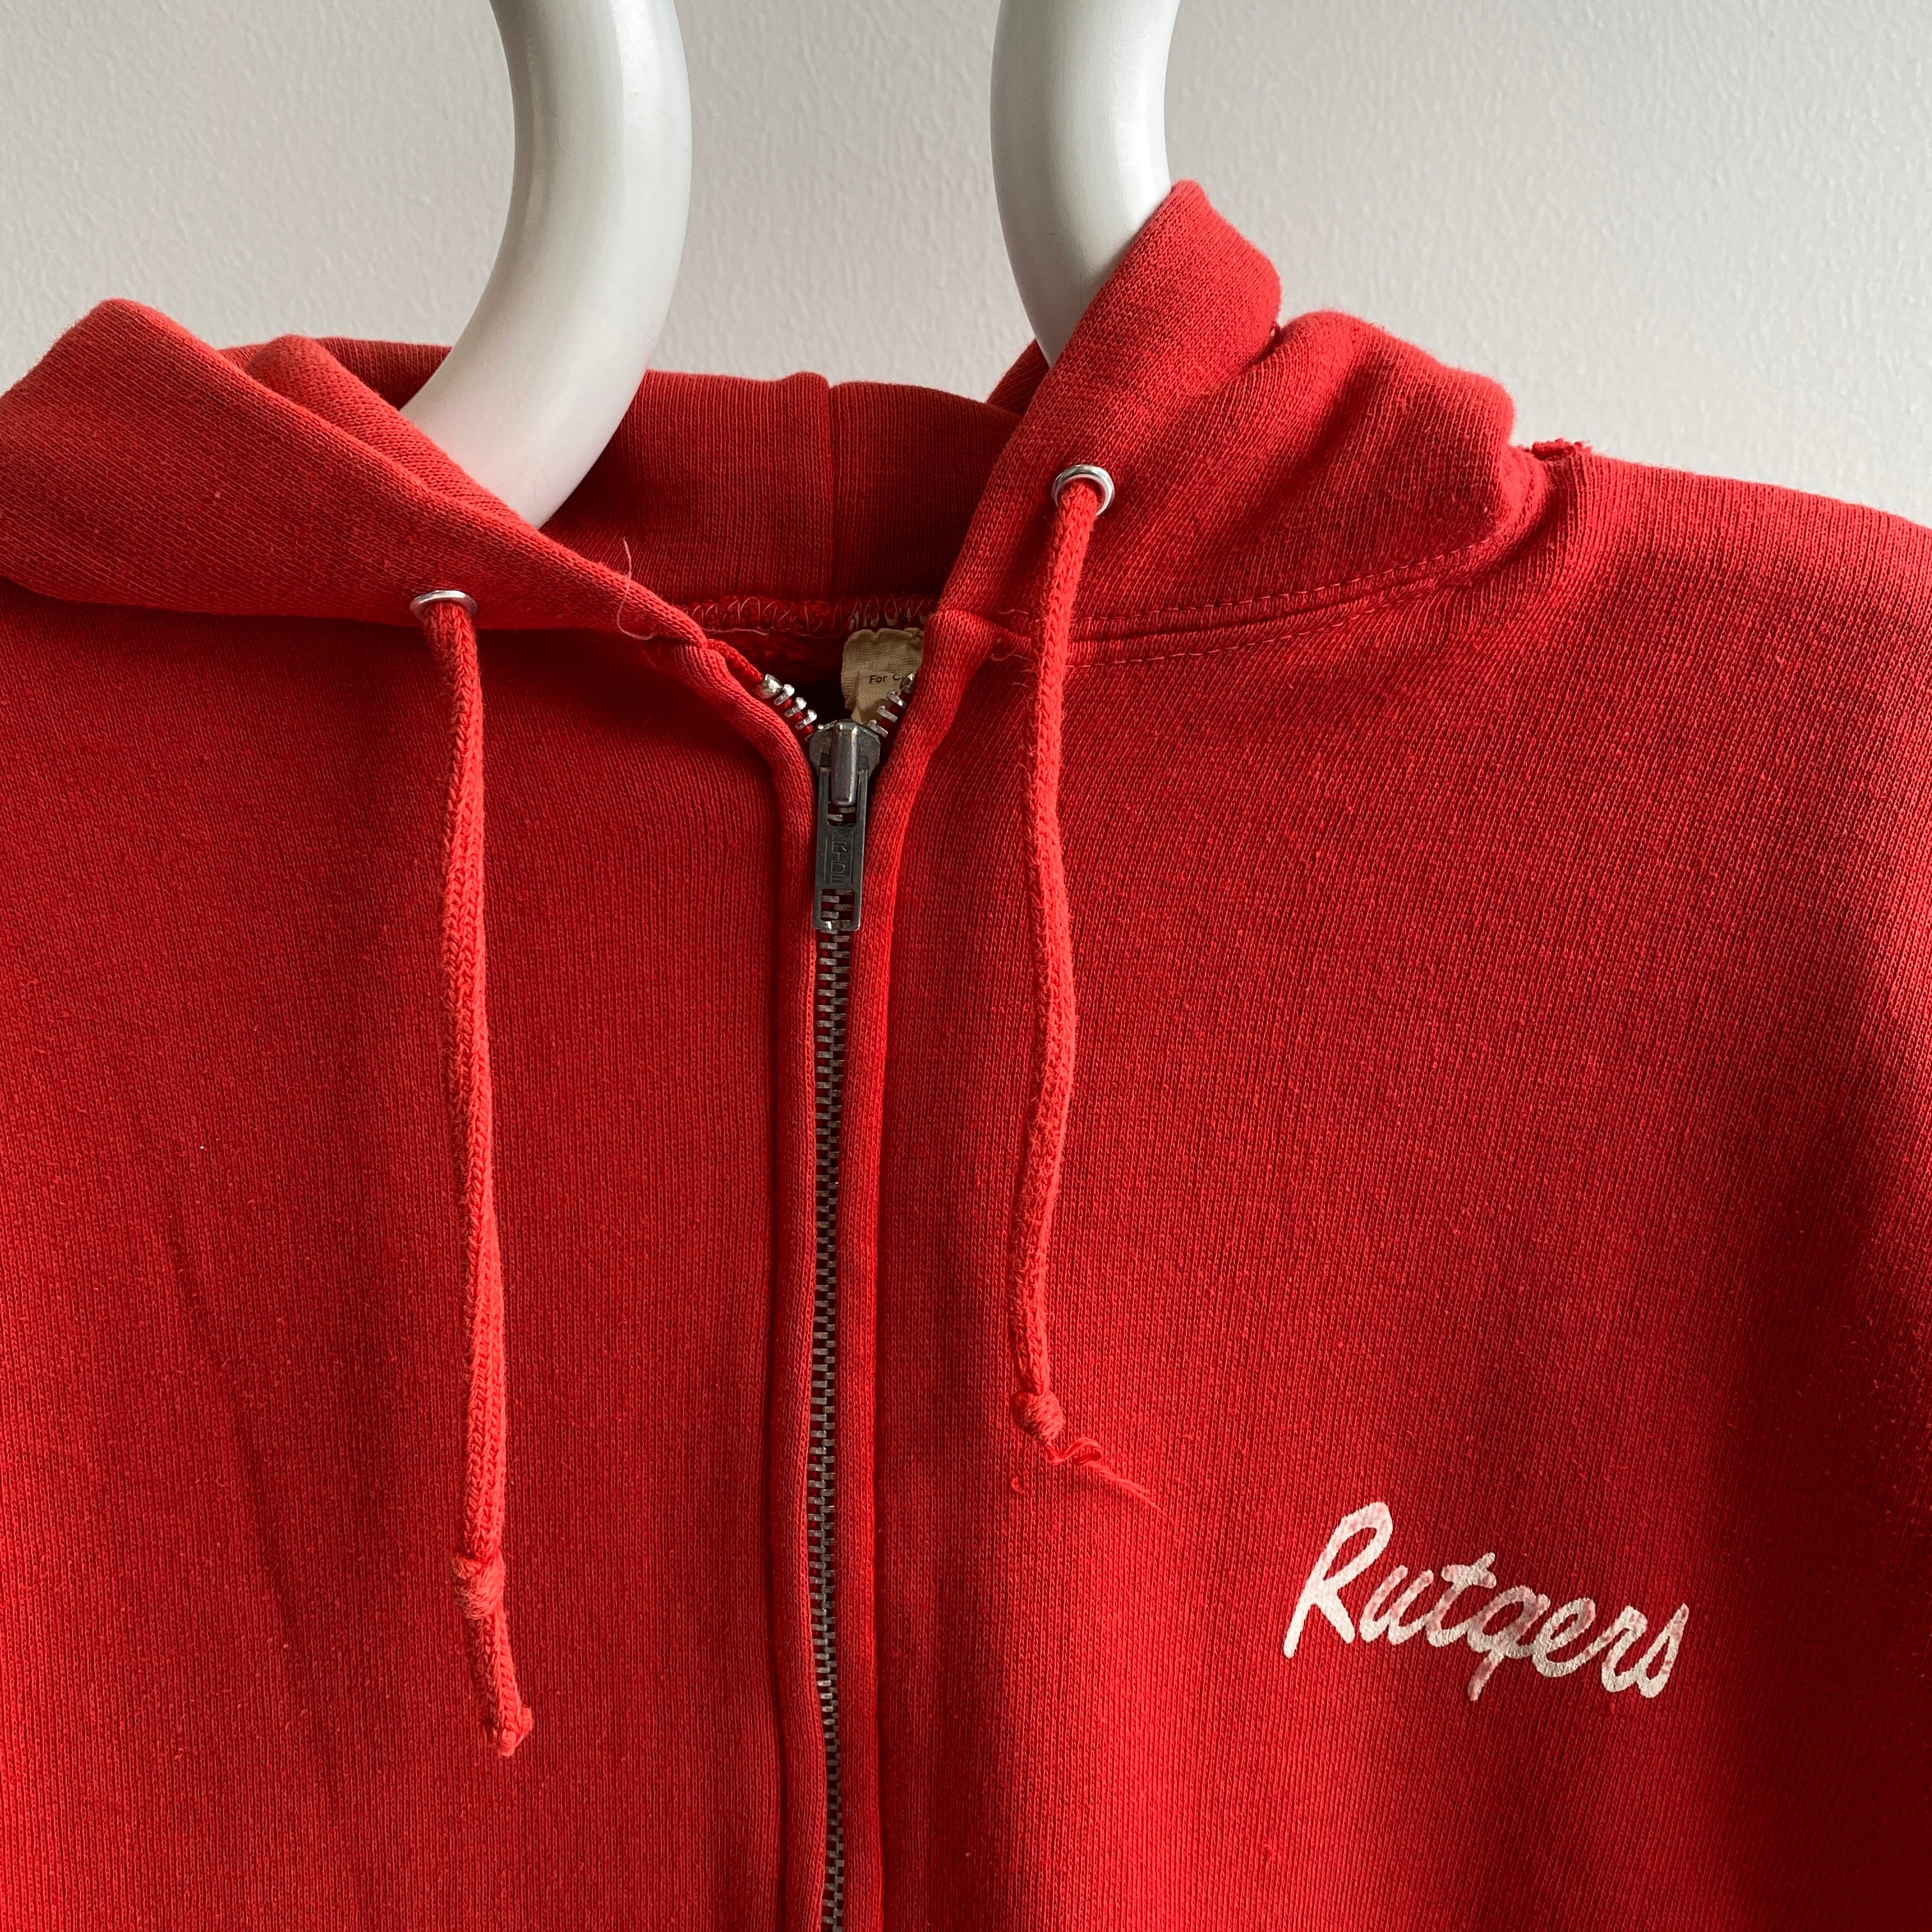 1980s Rutgers Soft and Slouchy Zip Up Hoodie